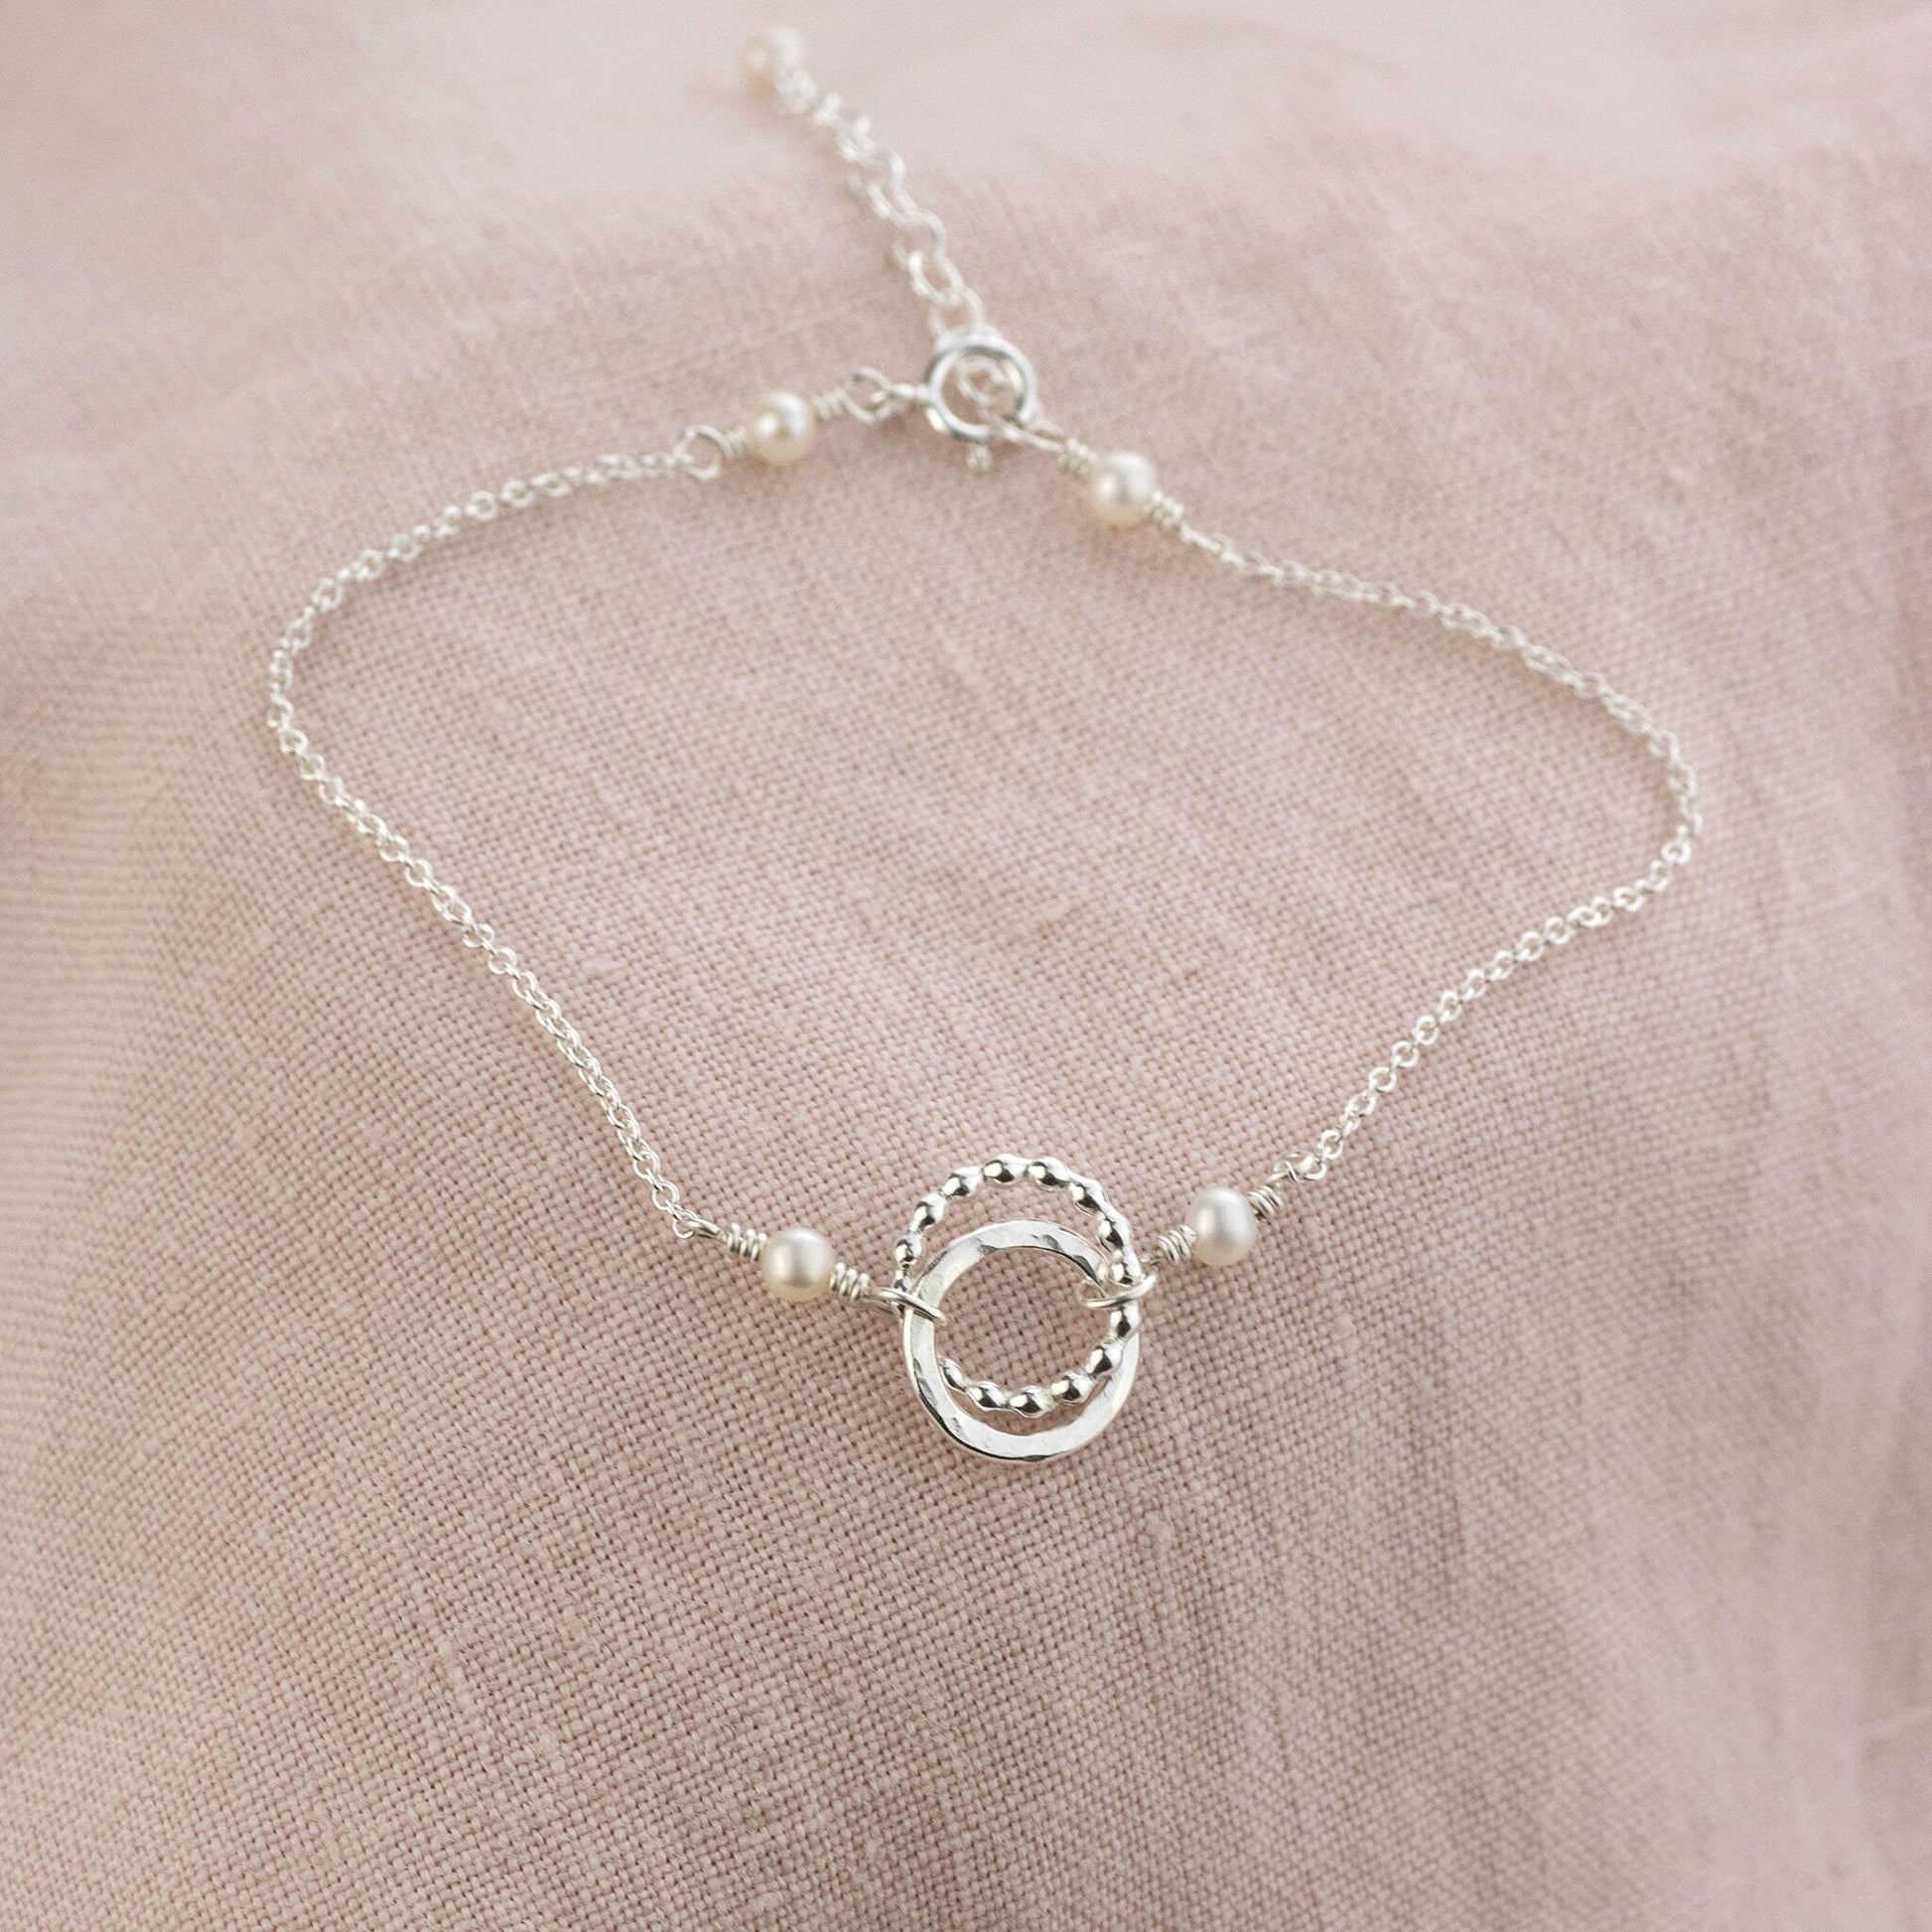 Gift for Friend & Bridesmaid - Love Knot Bracelet - Linked for a Lifetime - Silver